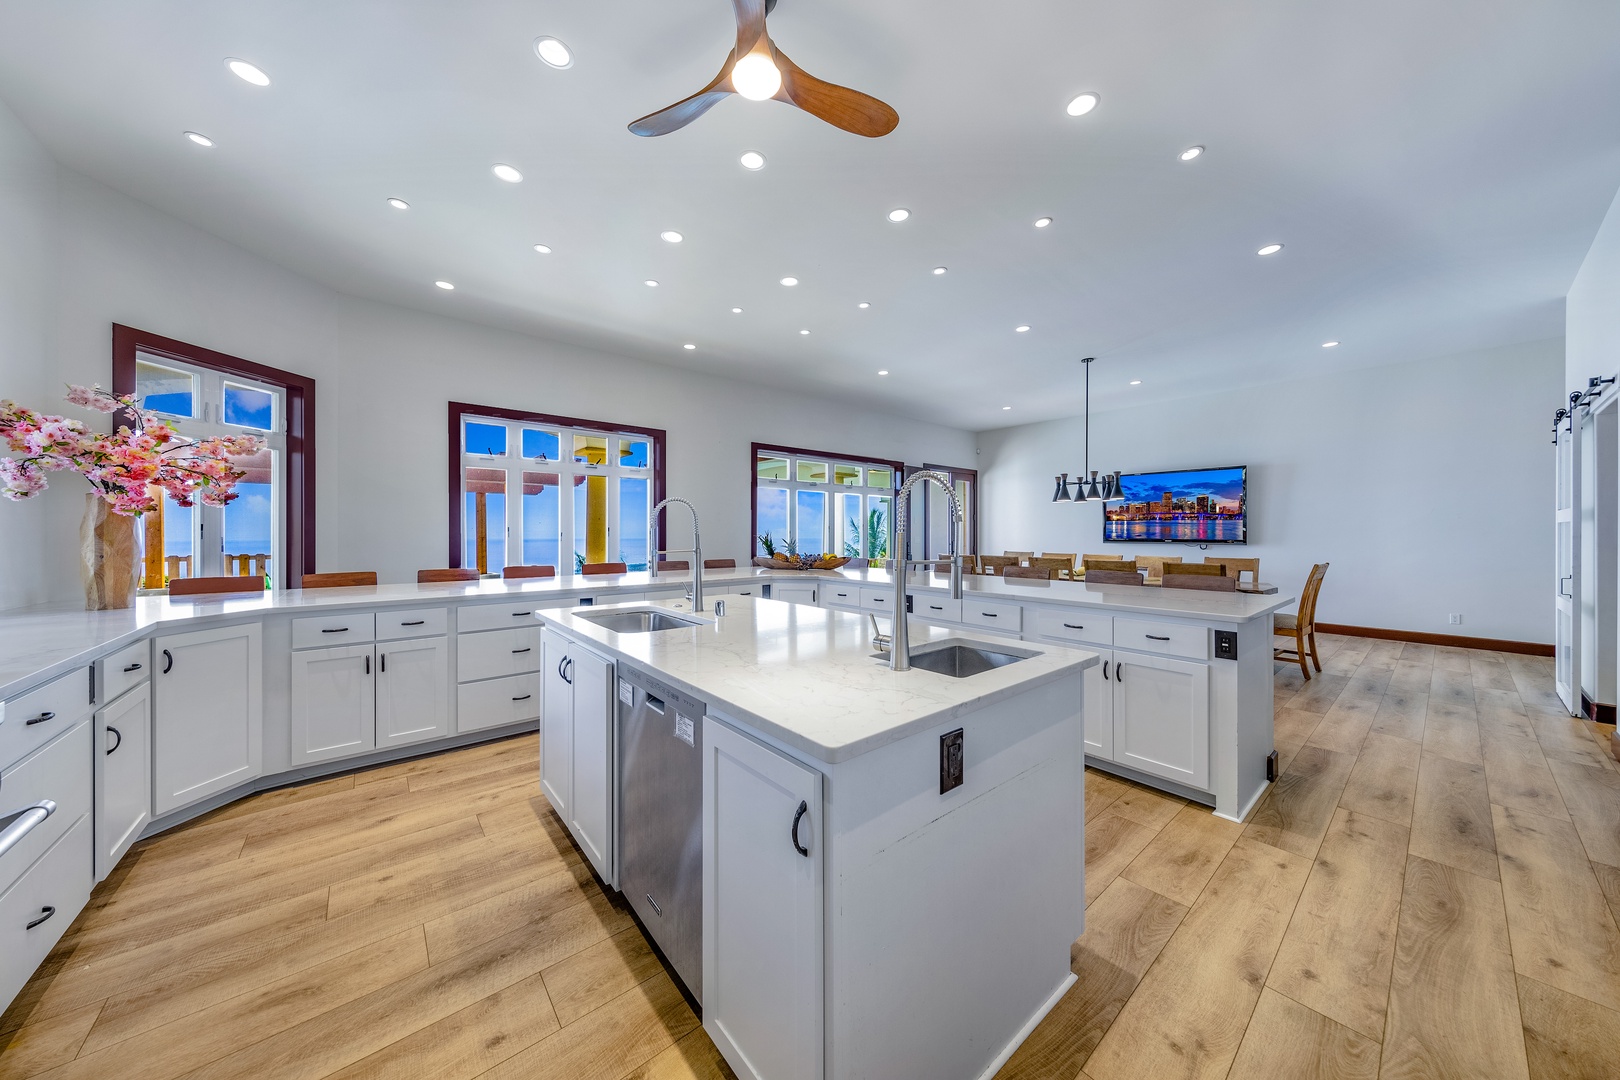 Kailua Kona Vacation Rentals, Kailua Kona Estate** - The kitchen is the heart of the home and perfect place for anytime of day.